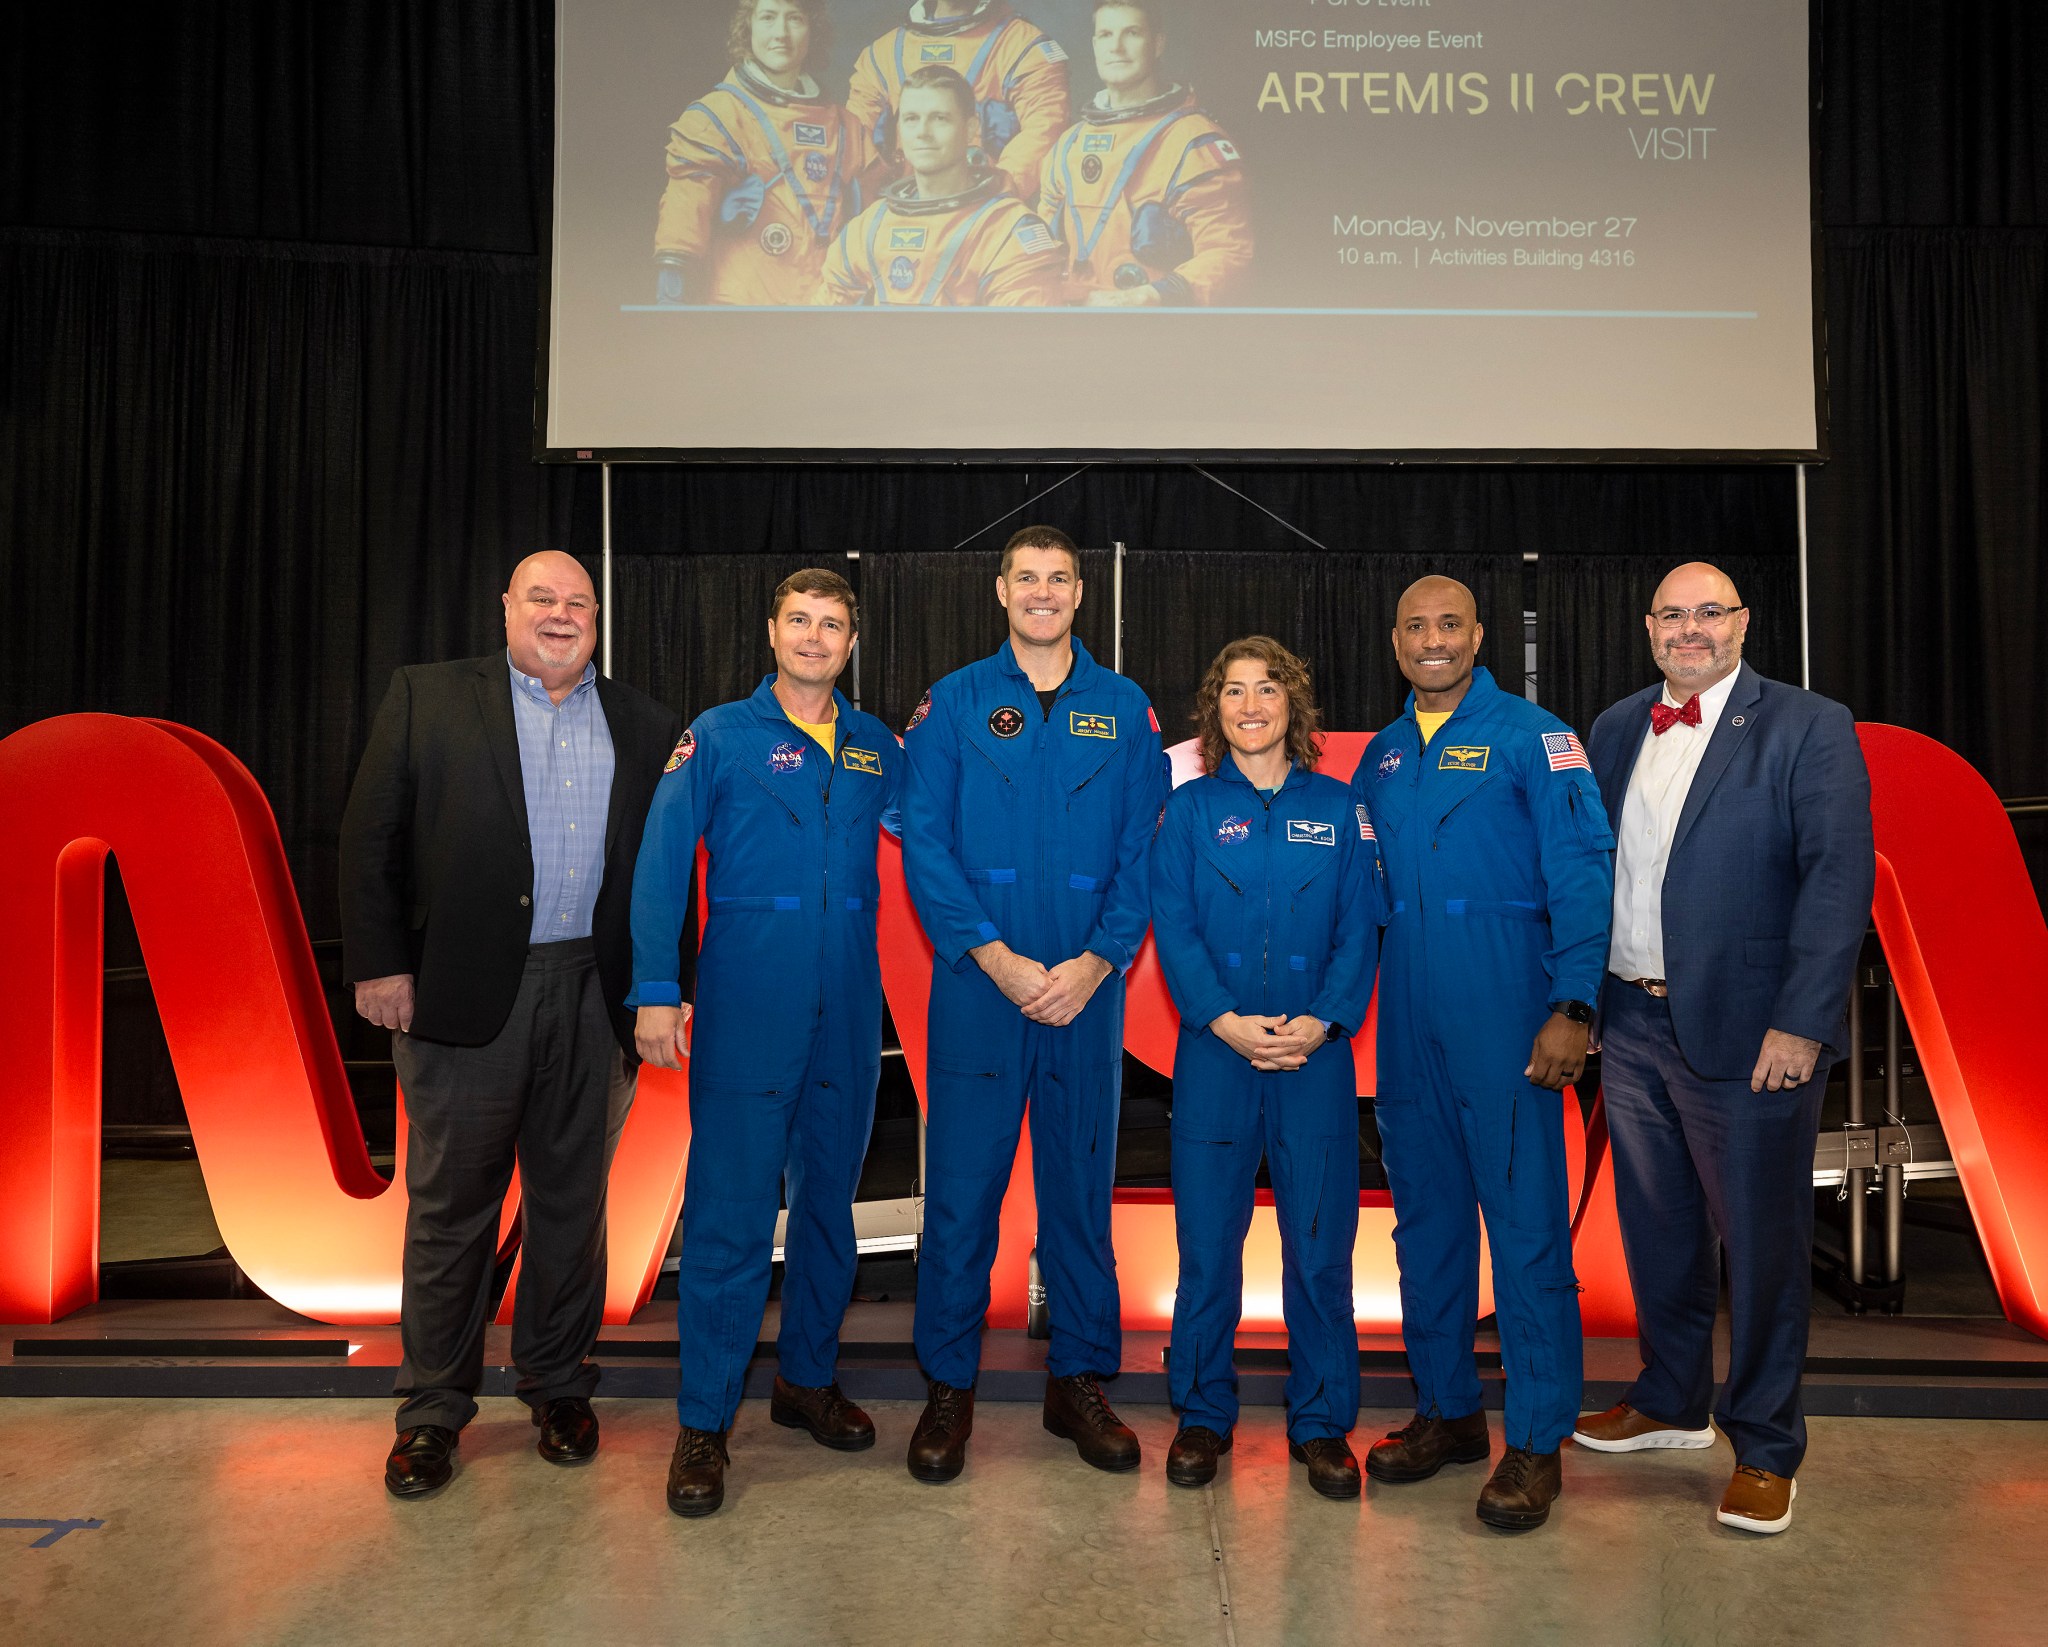 SLS Program Manager John Honeycutt, left, and acting Center Director Joseph Pelfrey, right, join the Artemis II crew for a photo at the employee event in Activities Building 4316.